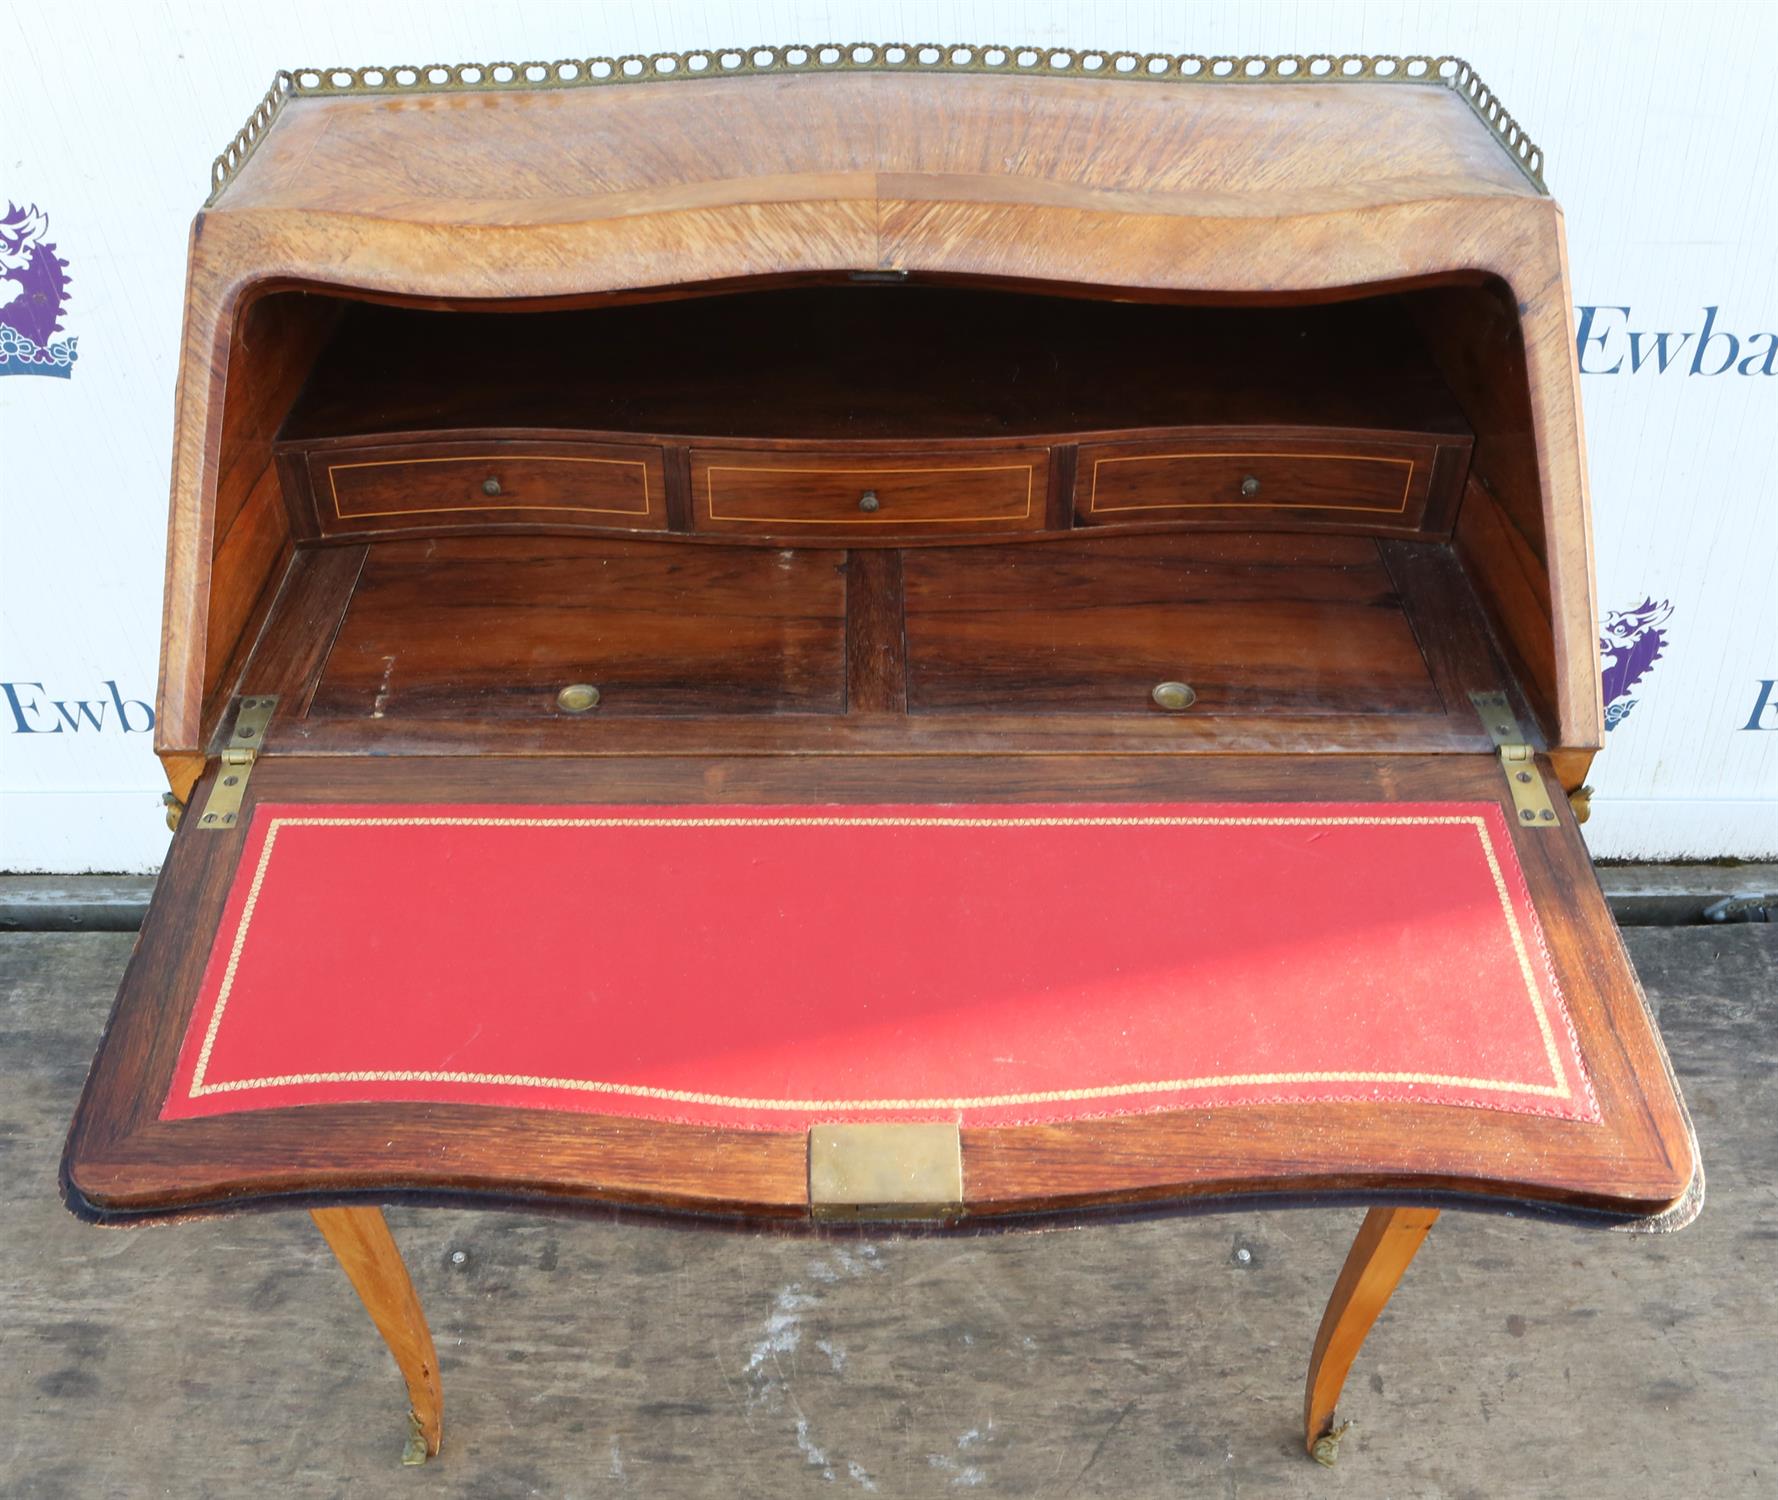 French rosewood and kingwood parquetry bonheur-du-jour, 19th Century, with brass gallery, - Image 2 of 3